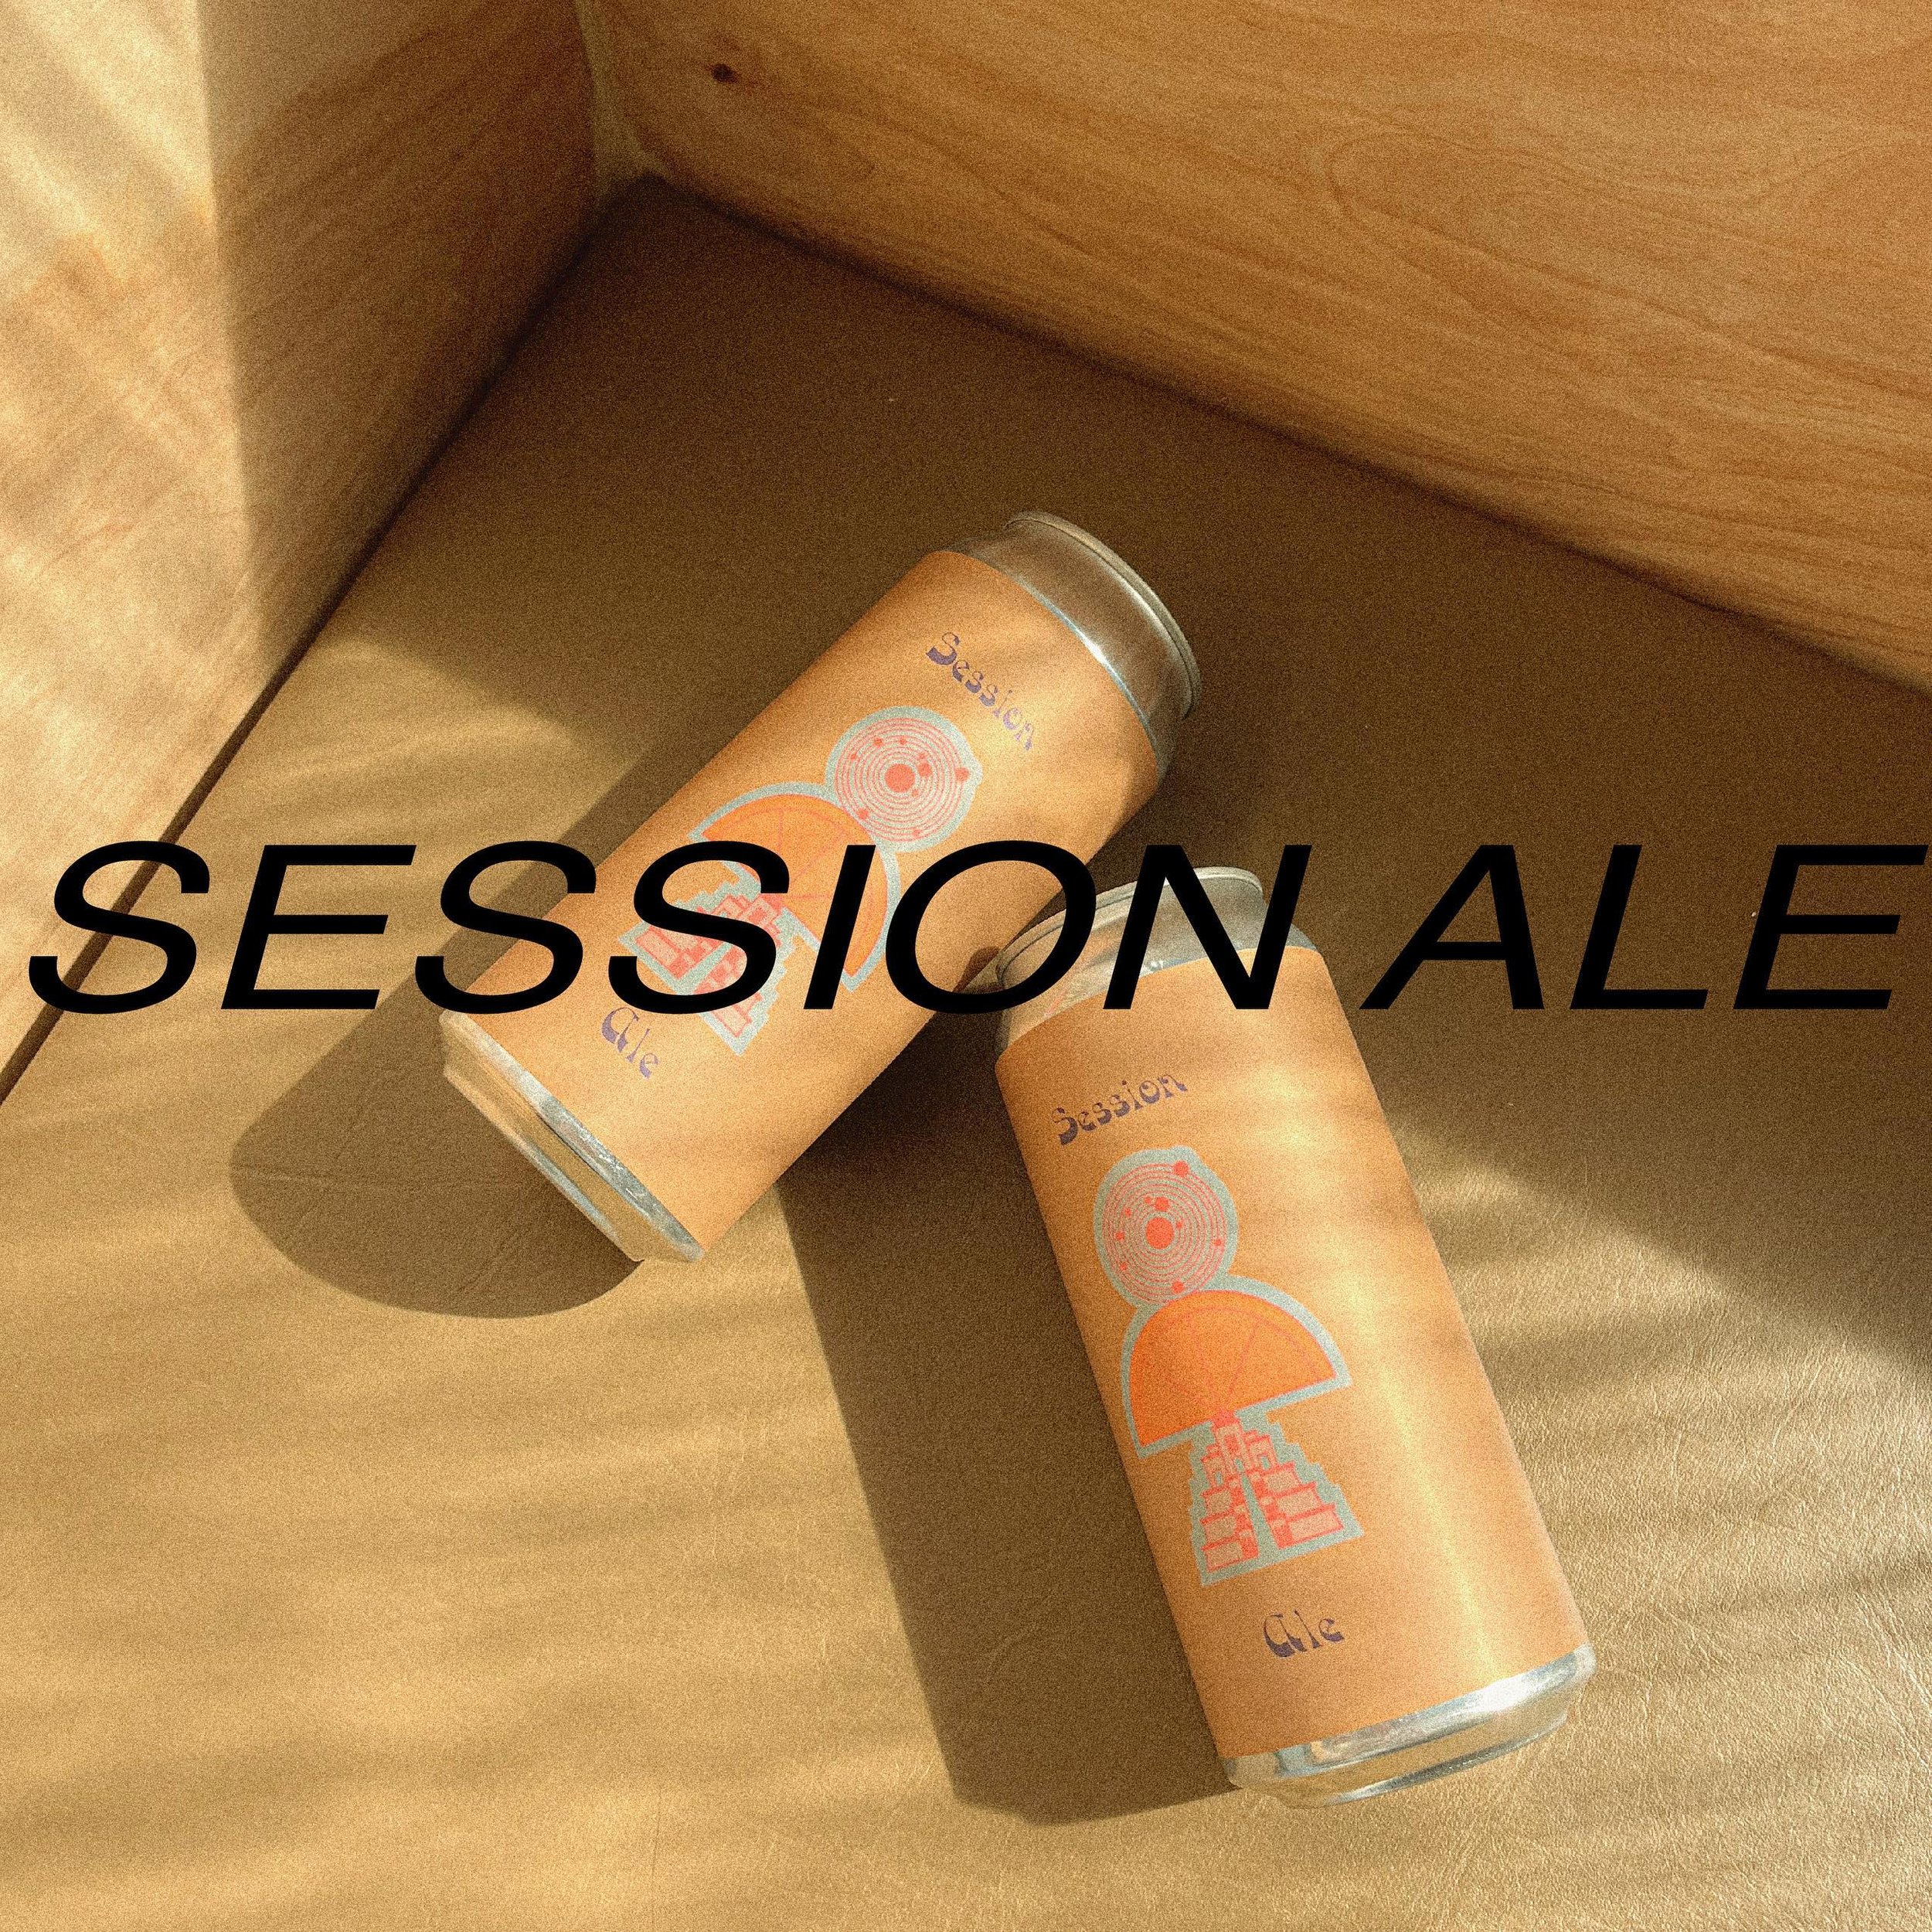 SESSION ALE 

a hop burst session ale loaded with tasty hops !! easy on the bitterness, crushable, and crisp, with light and bright fruit notes &lt;3 

in cans now !! 

see u at 3 friends !!